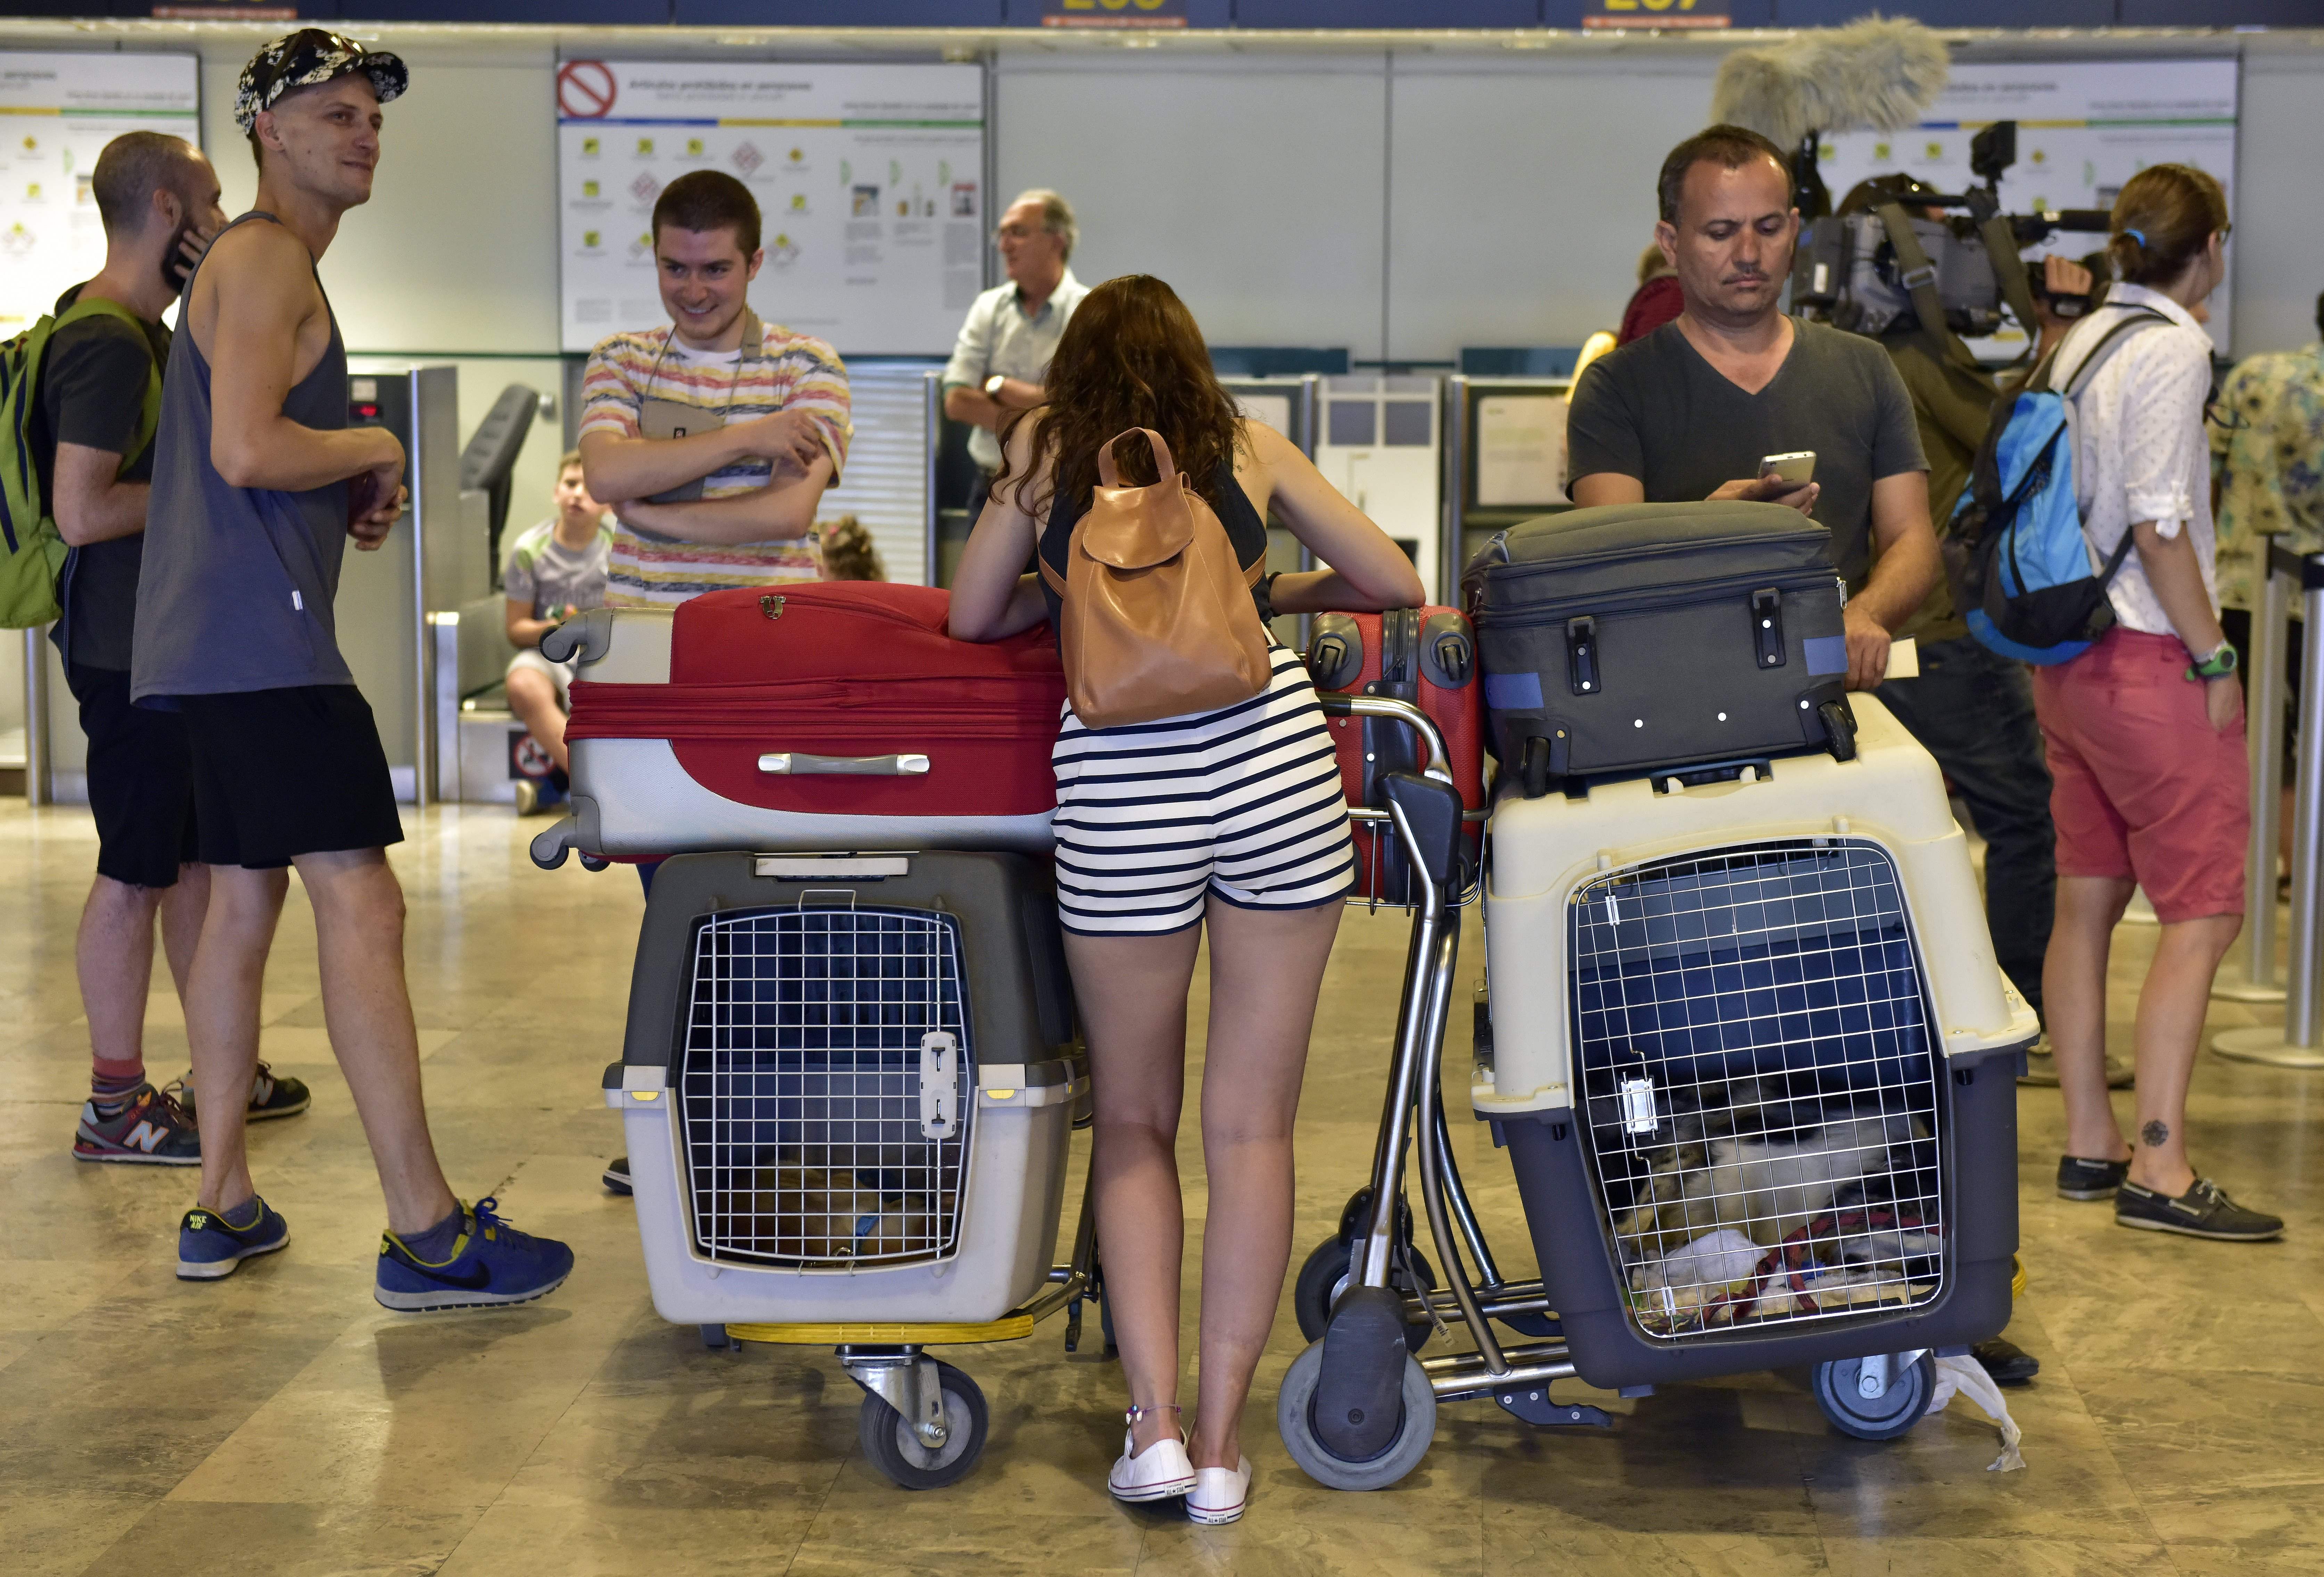 Some 200 exasperated Aeromexico customers were camped-out today at Madrid-Barajas airport, some for the past two weeks, waiting to see if in the coming days they will be able to fly to Mexico after purchasing at a low price dependent on availability. (GERARD JULIEN/AFP via Getty Images)